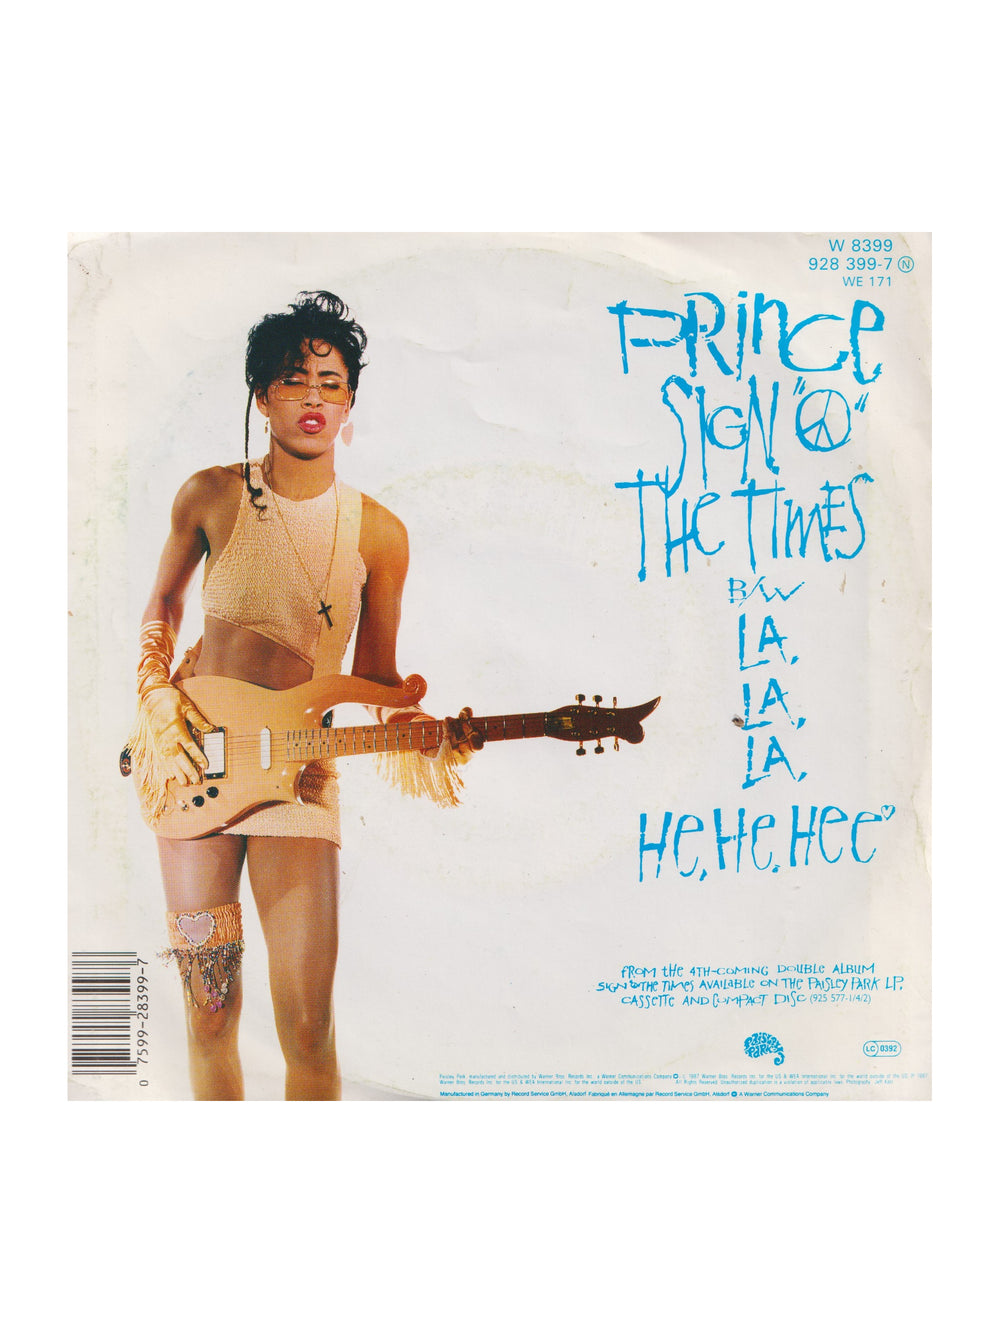 Prince – Sign "O" The Times Vinyl 7" Single Europe / Germany Preloved: 1987